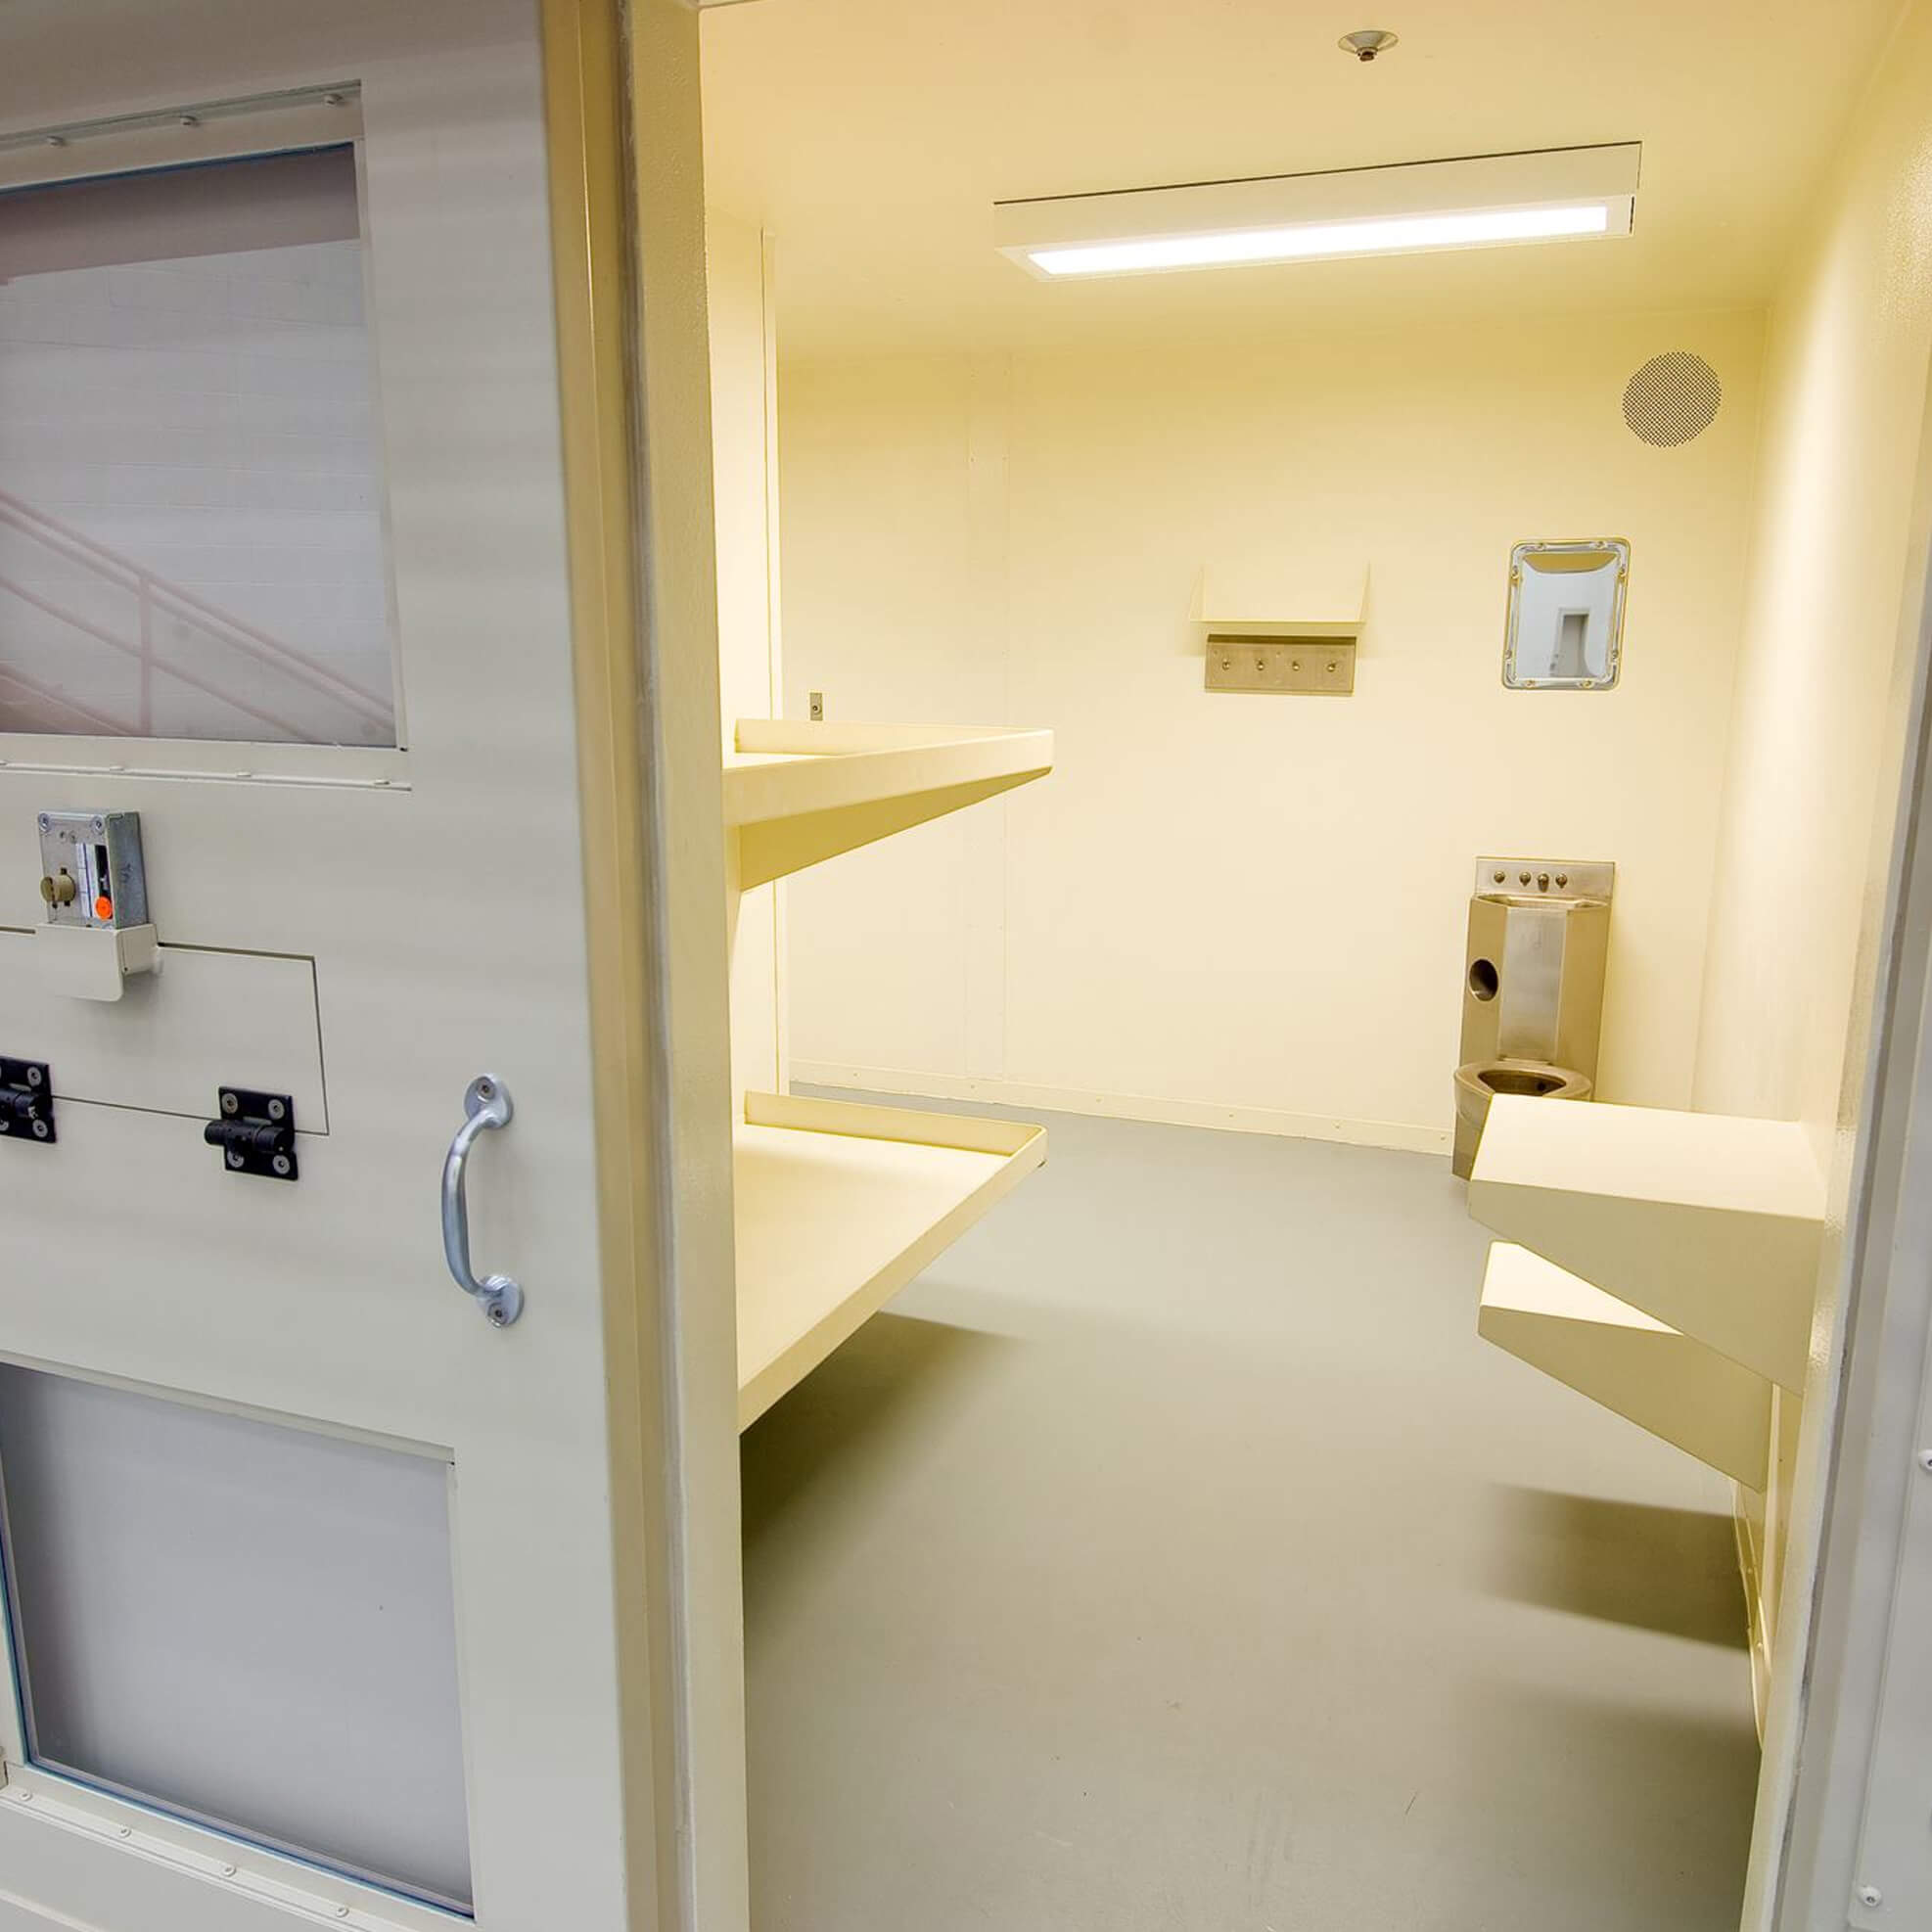 Picture of the inside of a prison cell